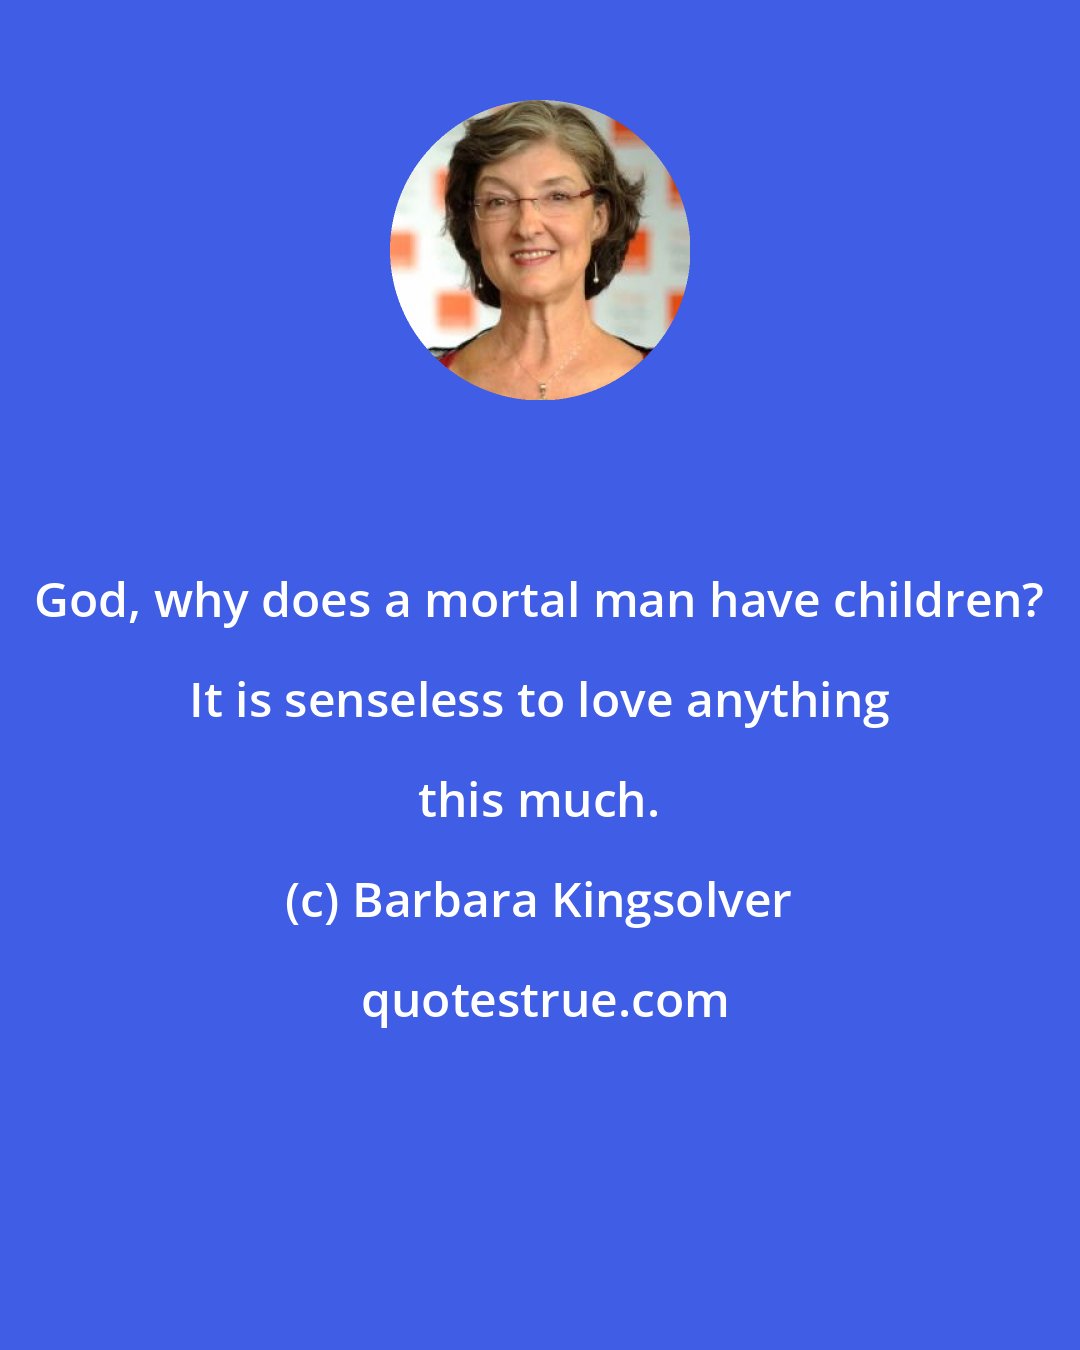 Barbara Kingsolver: God, why does a mortal man have children? It is senseless to love anything this much.